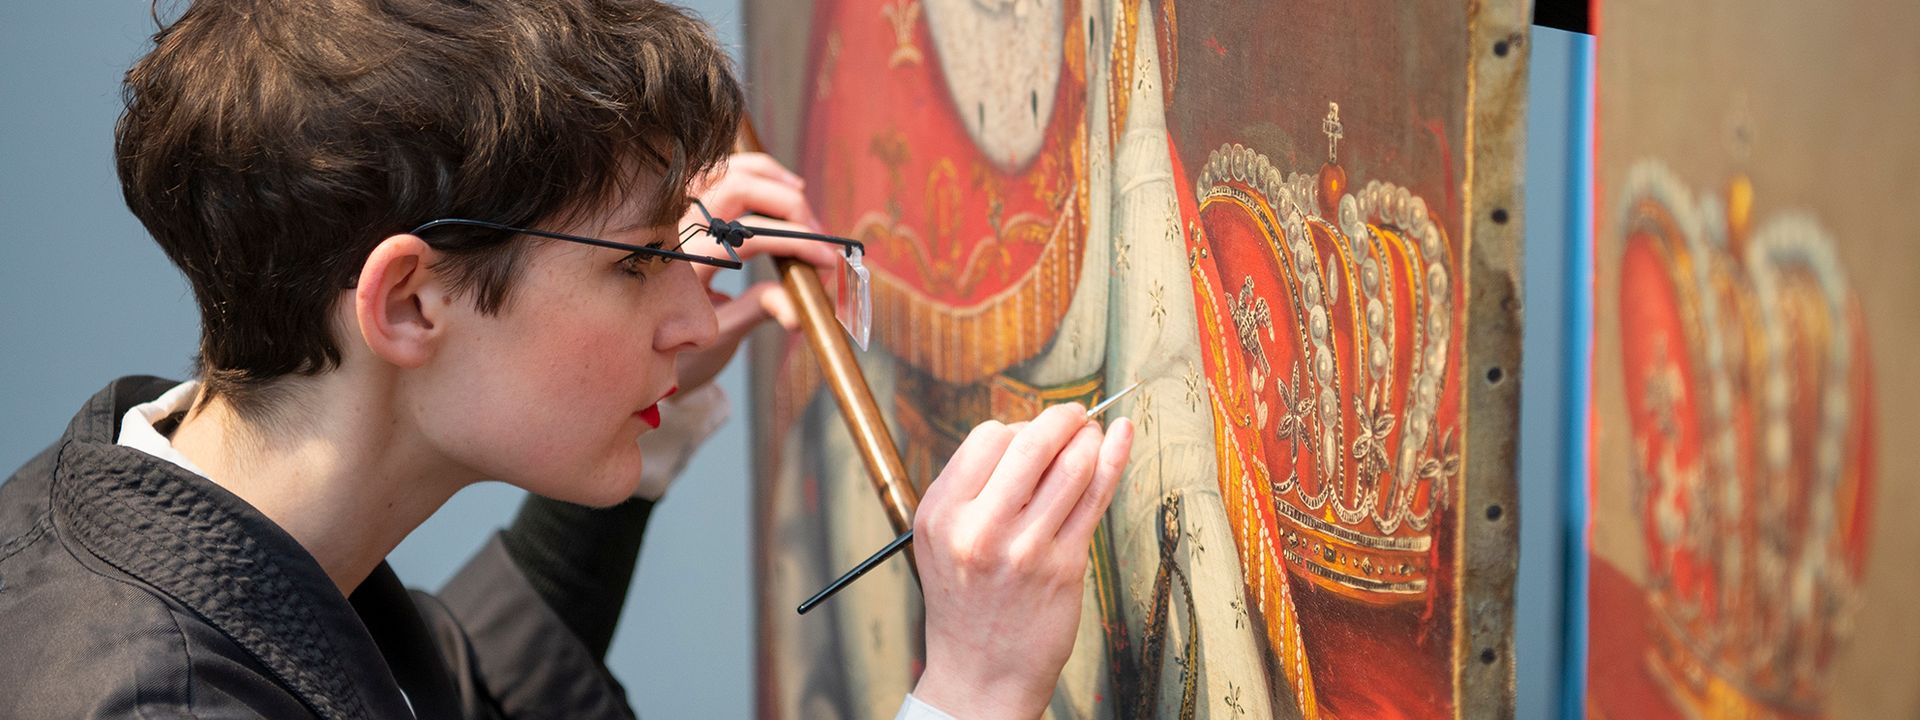 A conservator inspecting a painting with a fine brush and magnifying glass